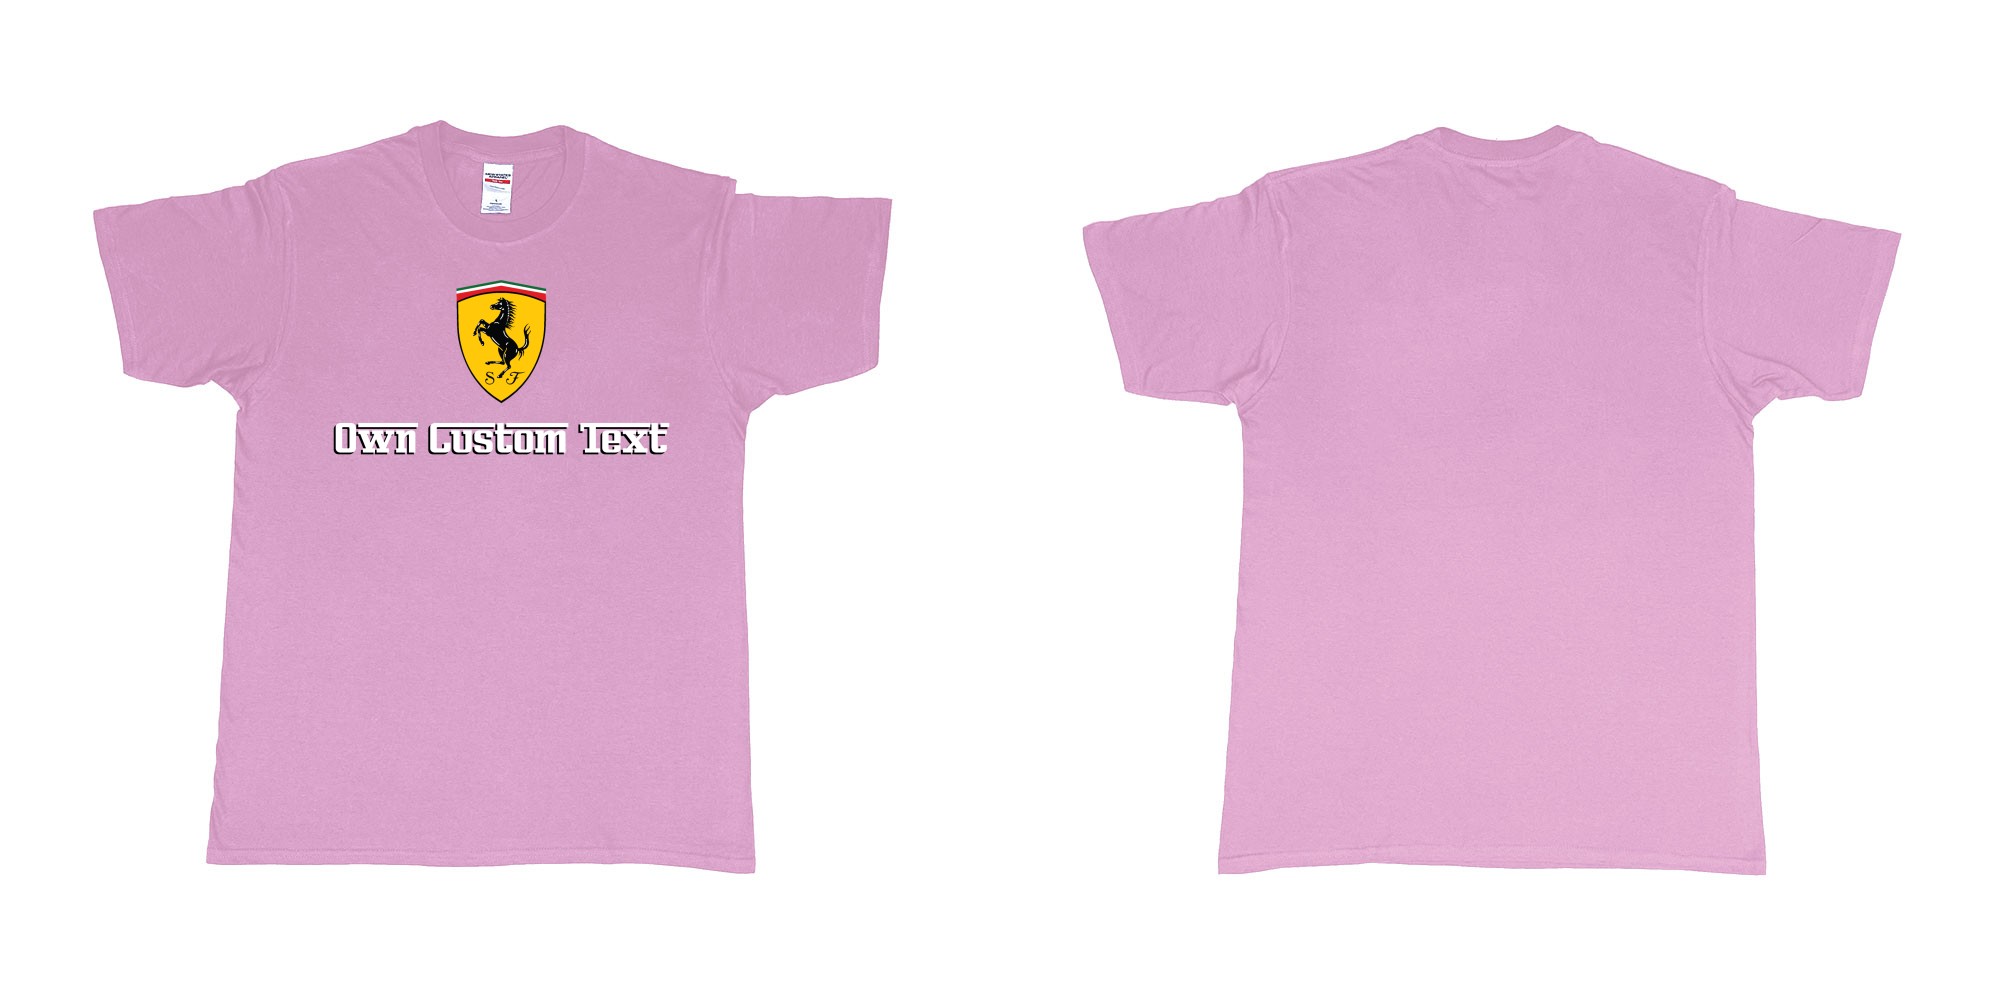 Custom tshirt design ferrari logo design custom print tshirt in fabric color light-pink choice your own text made in Bali by The Pirate Way